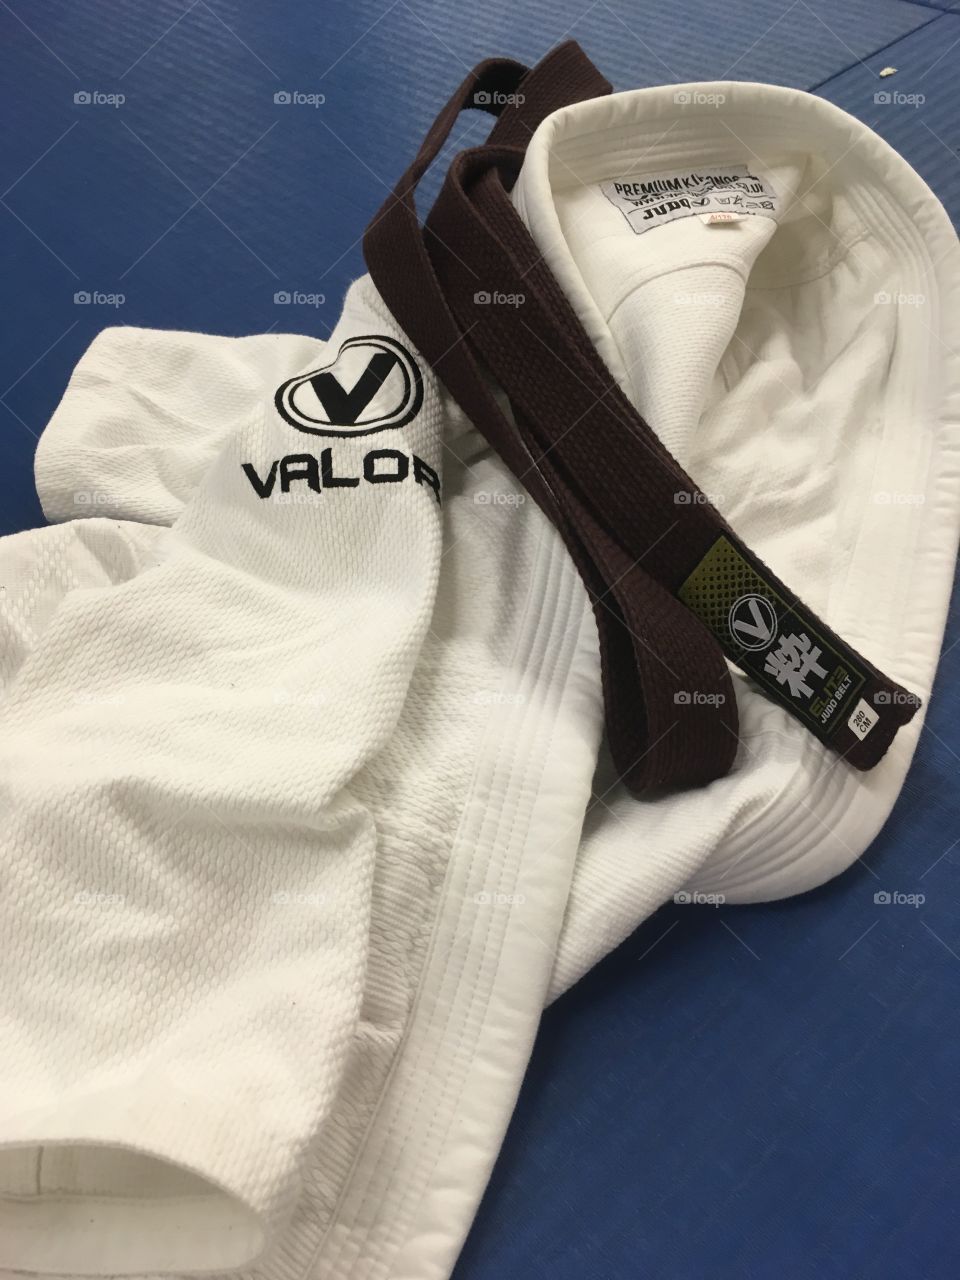 Valor gi and judo brown belt on the mats